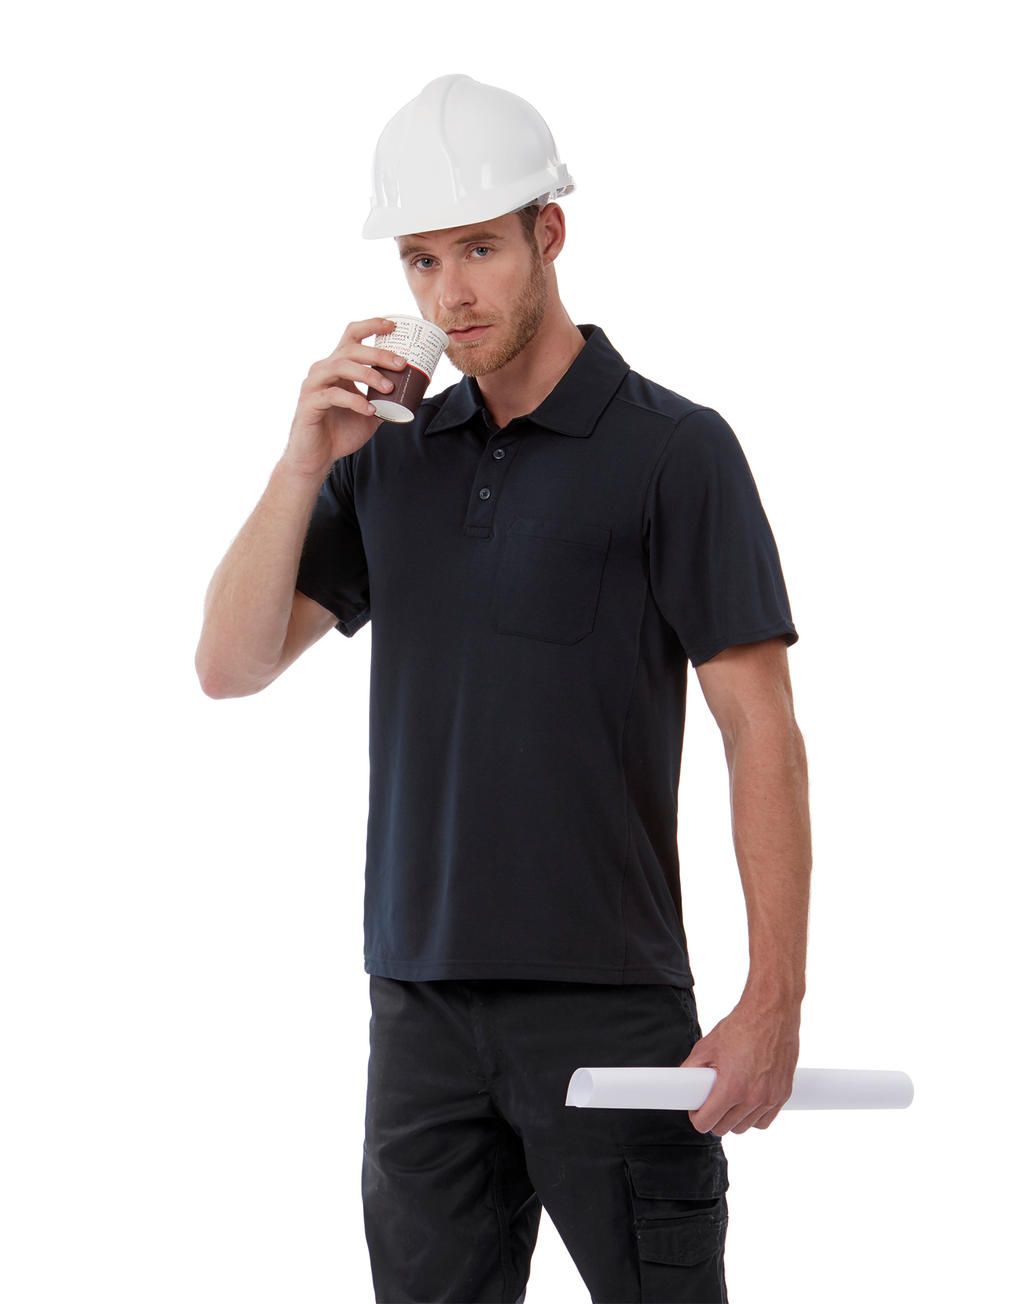 Coolpower Pocket Polo